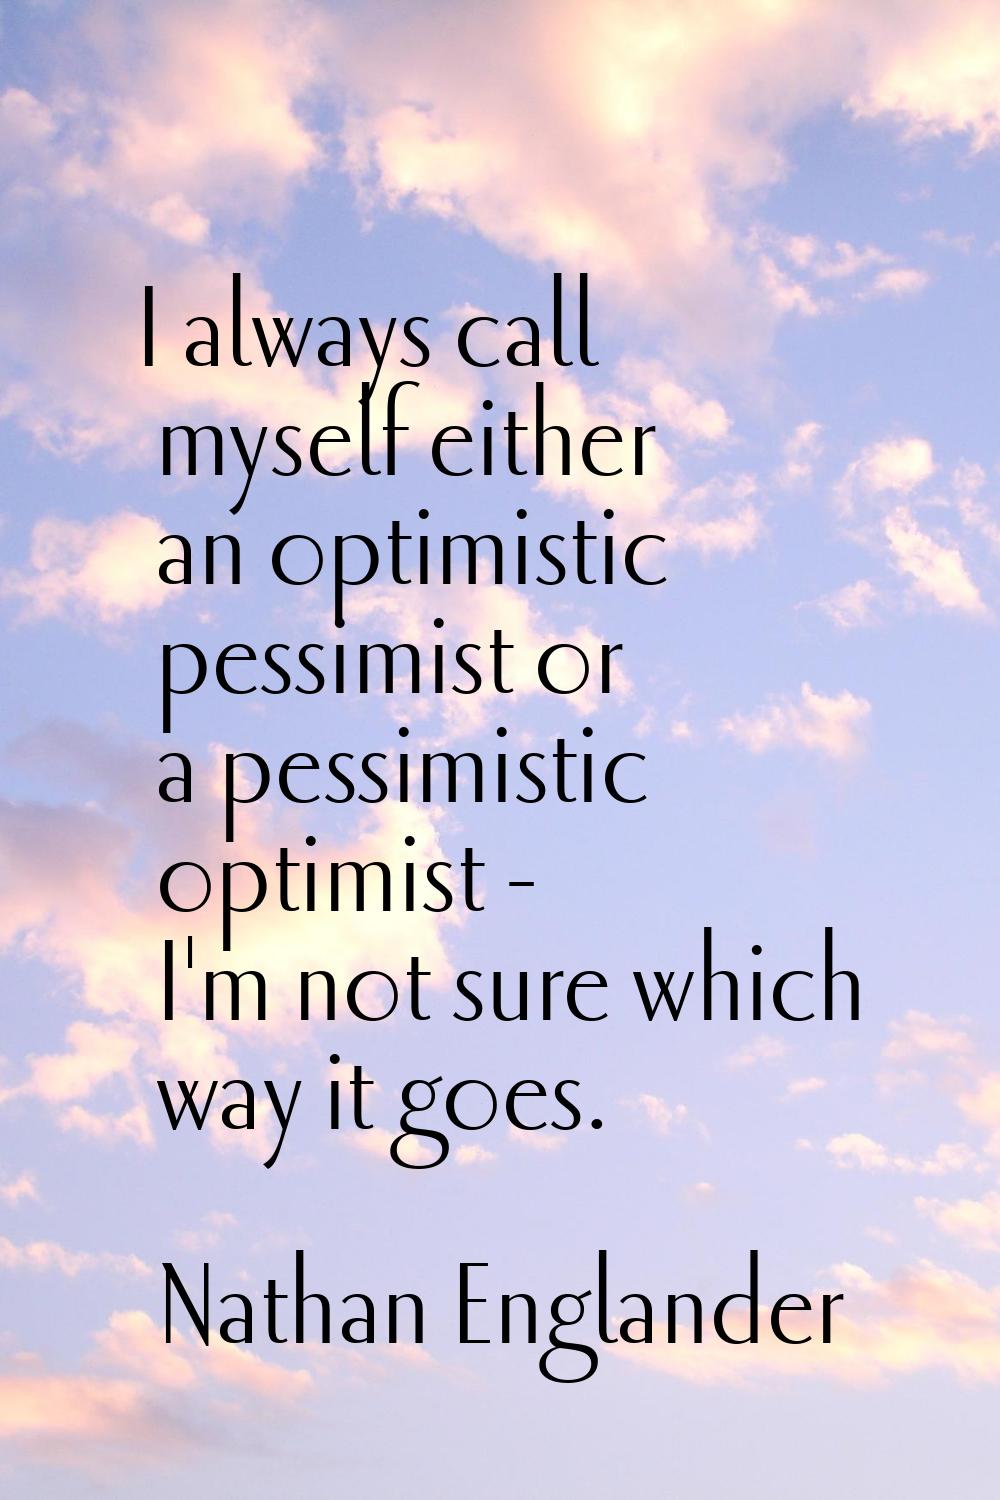 I always call myself either an optimistic pessimist or a pessimistic optimist - I'm not sure which 